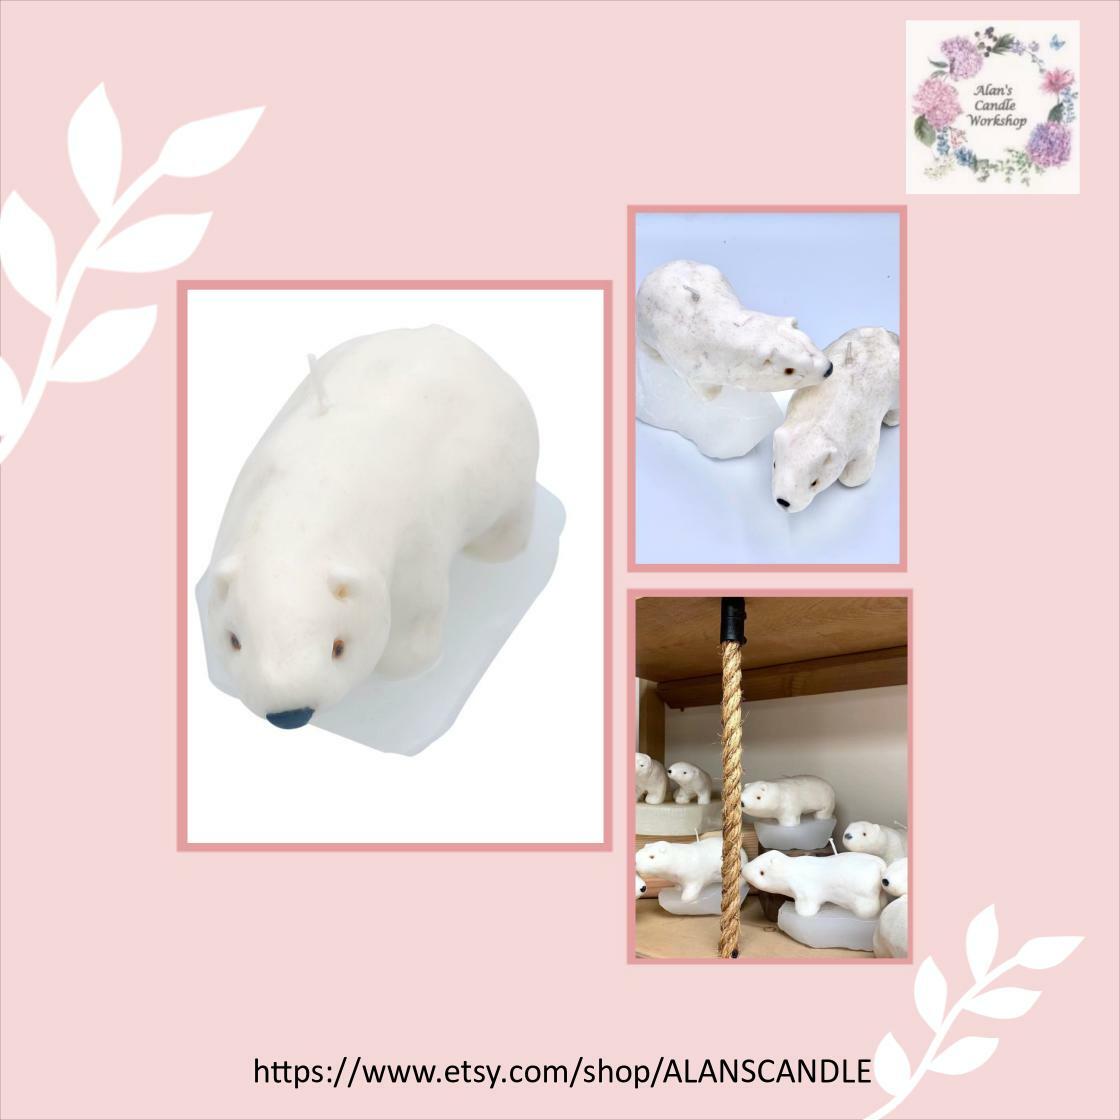 🐣. Offer Xtras! Polar Bear Artistic Handmade Sent-Free Candle for $49.99 #HandmadeCandles #PersonalizedGifts